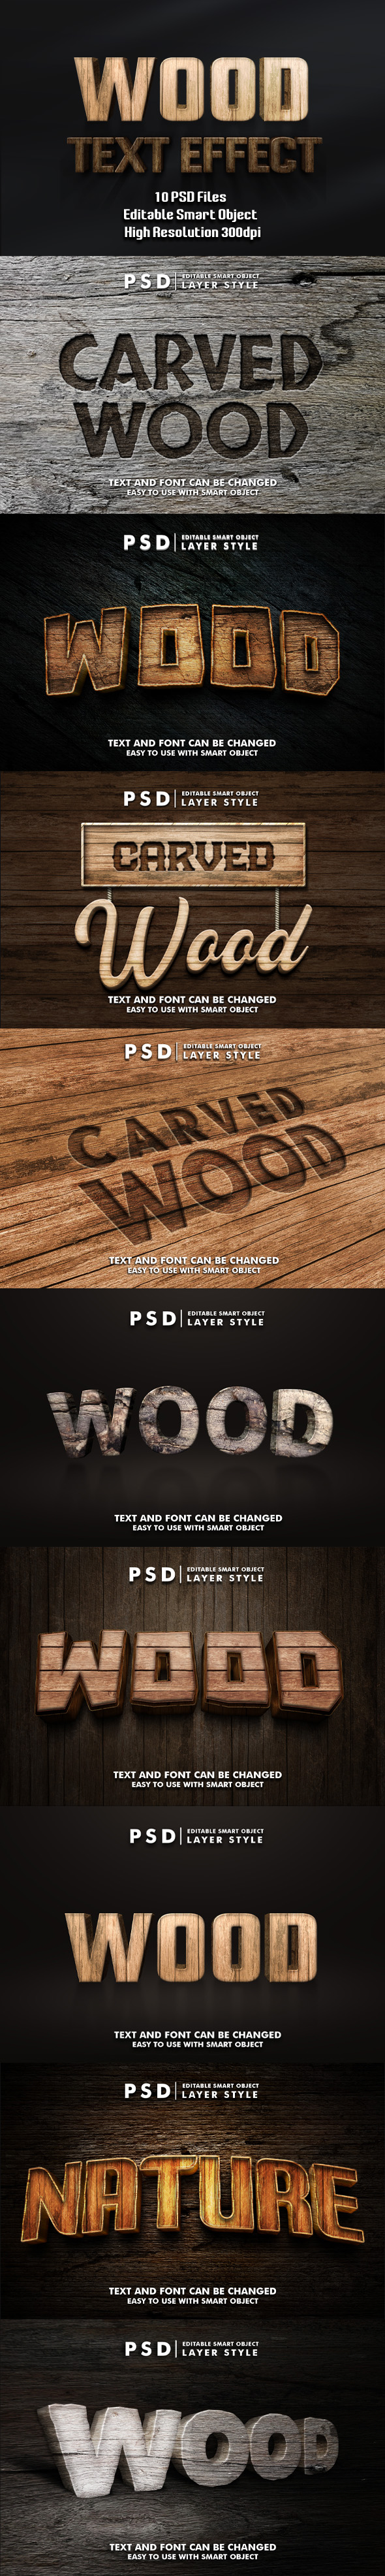 The Best of Wood Psd Text Effect